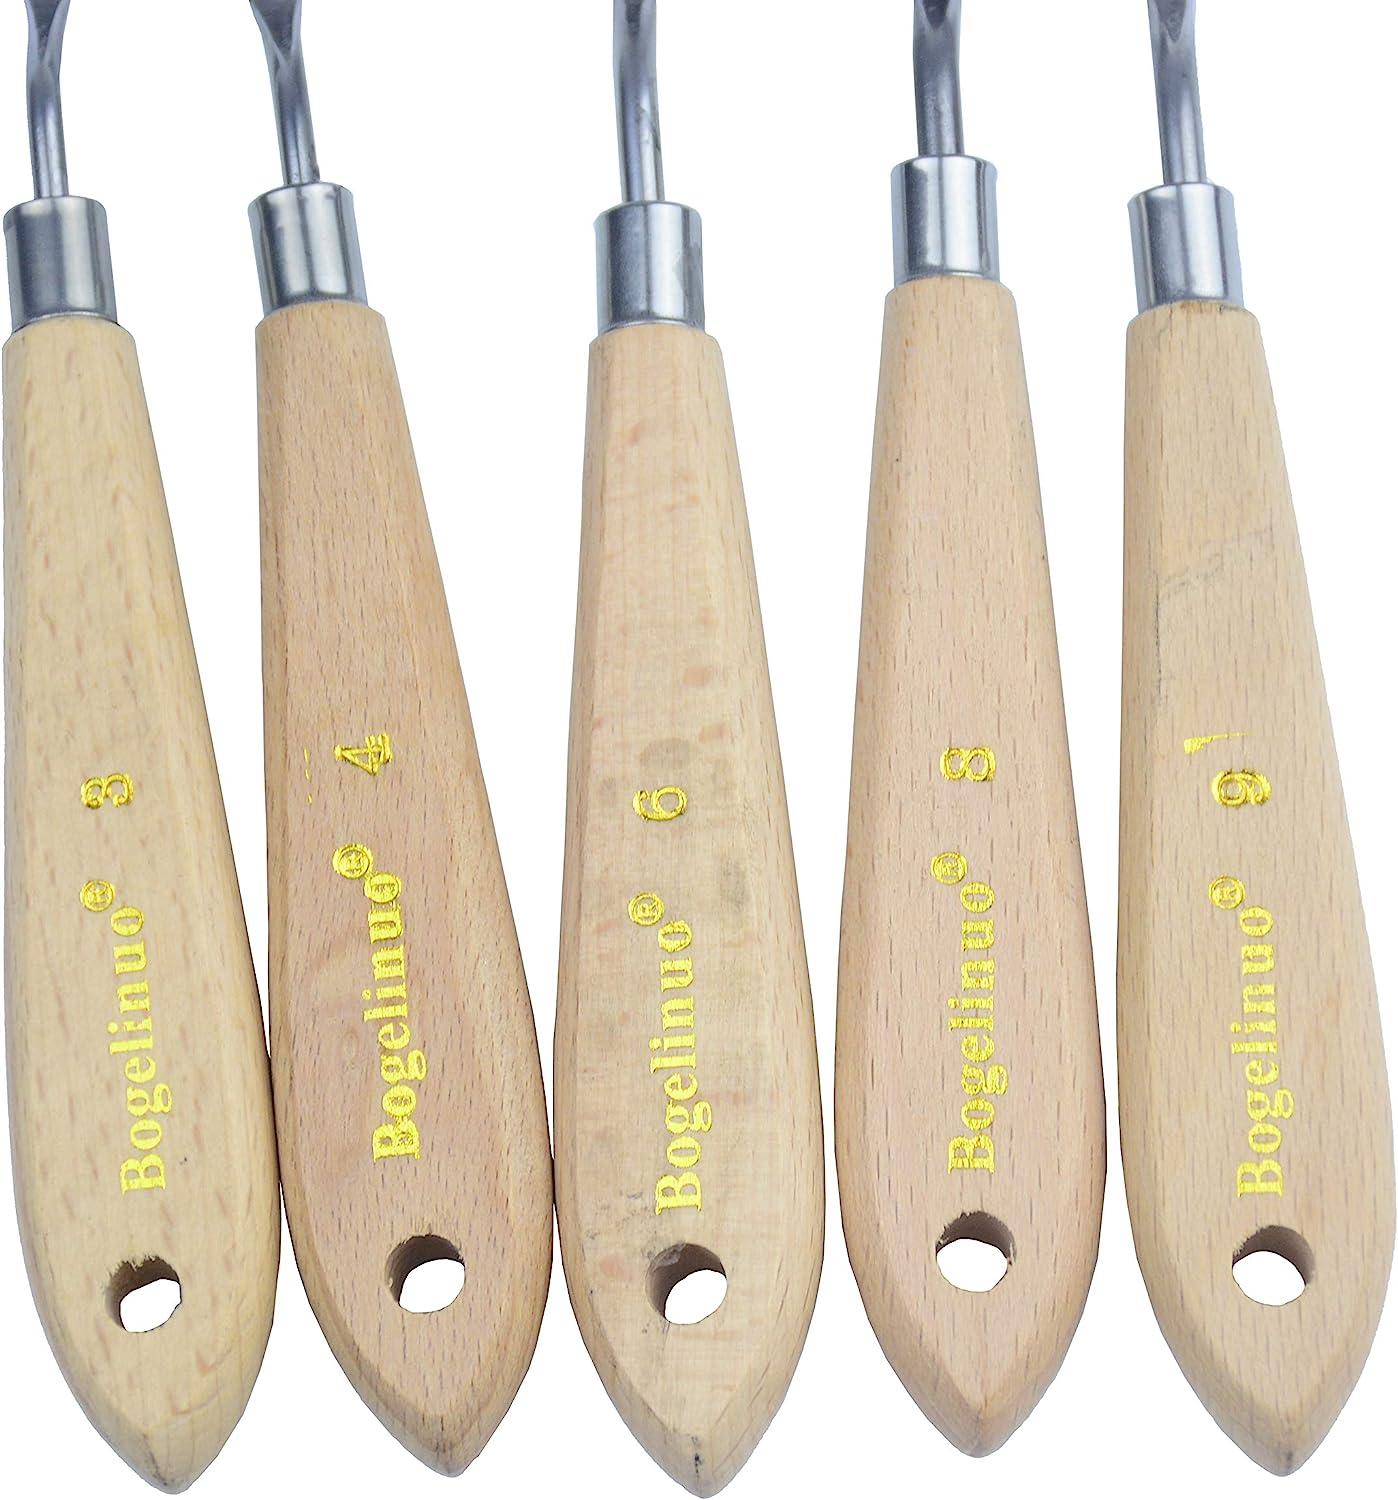 AebDerp 5 pcs Palette Knife Art Tools with Wooden Knife Handle Material for Painting  Canvas & Palette Knife for Acrylic Painting